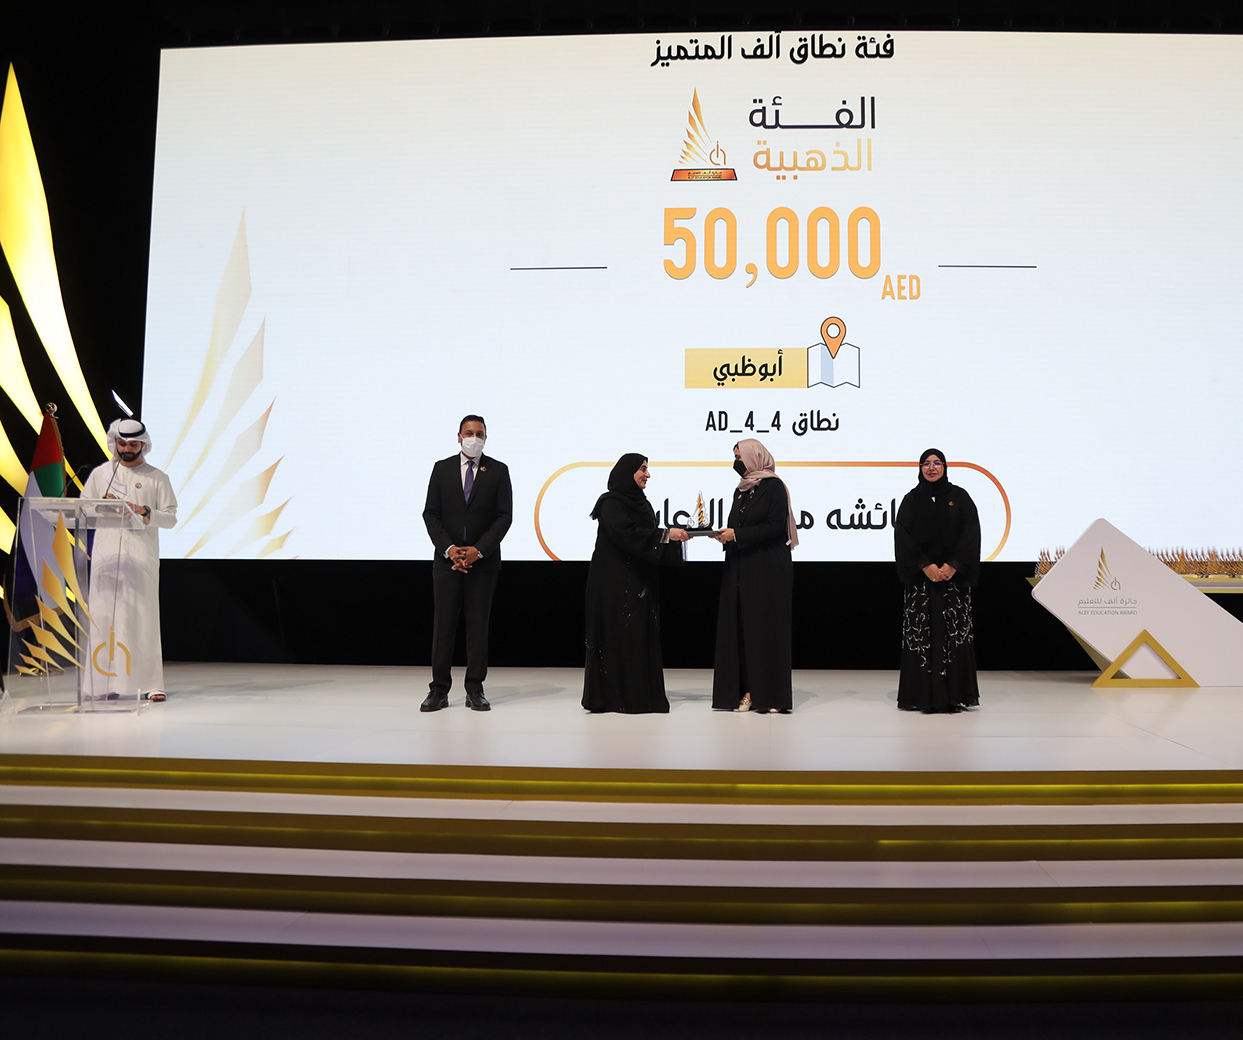 Alef Education Award Celebrates 71 Winners from the UAE Public Schools for Digital Learning with AED 1 million+ Cash Prizes